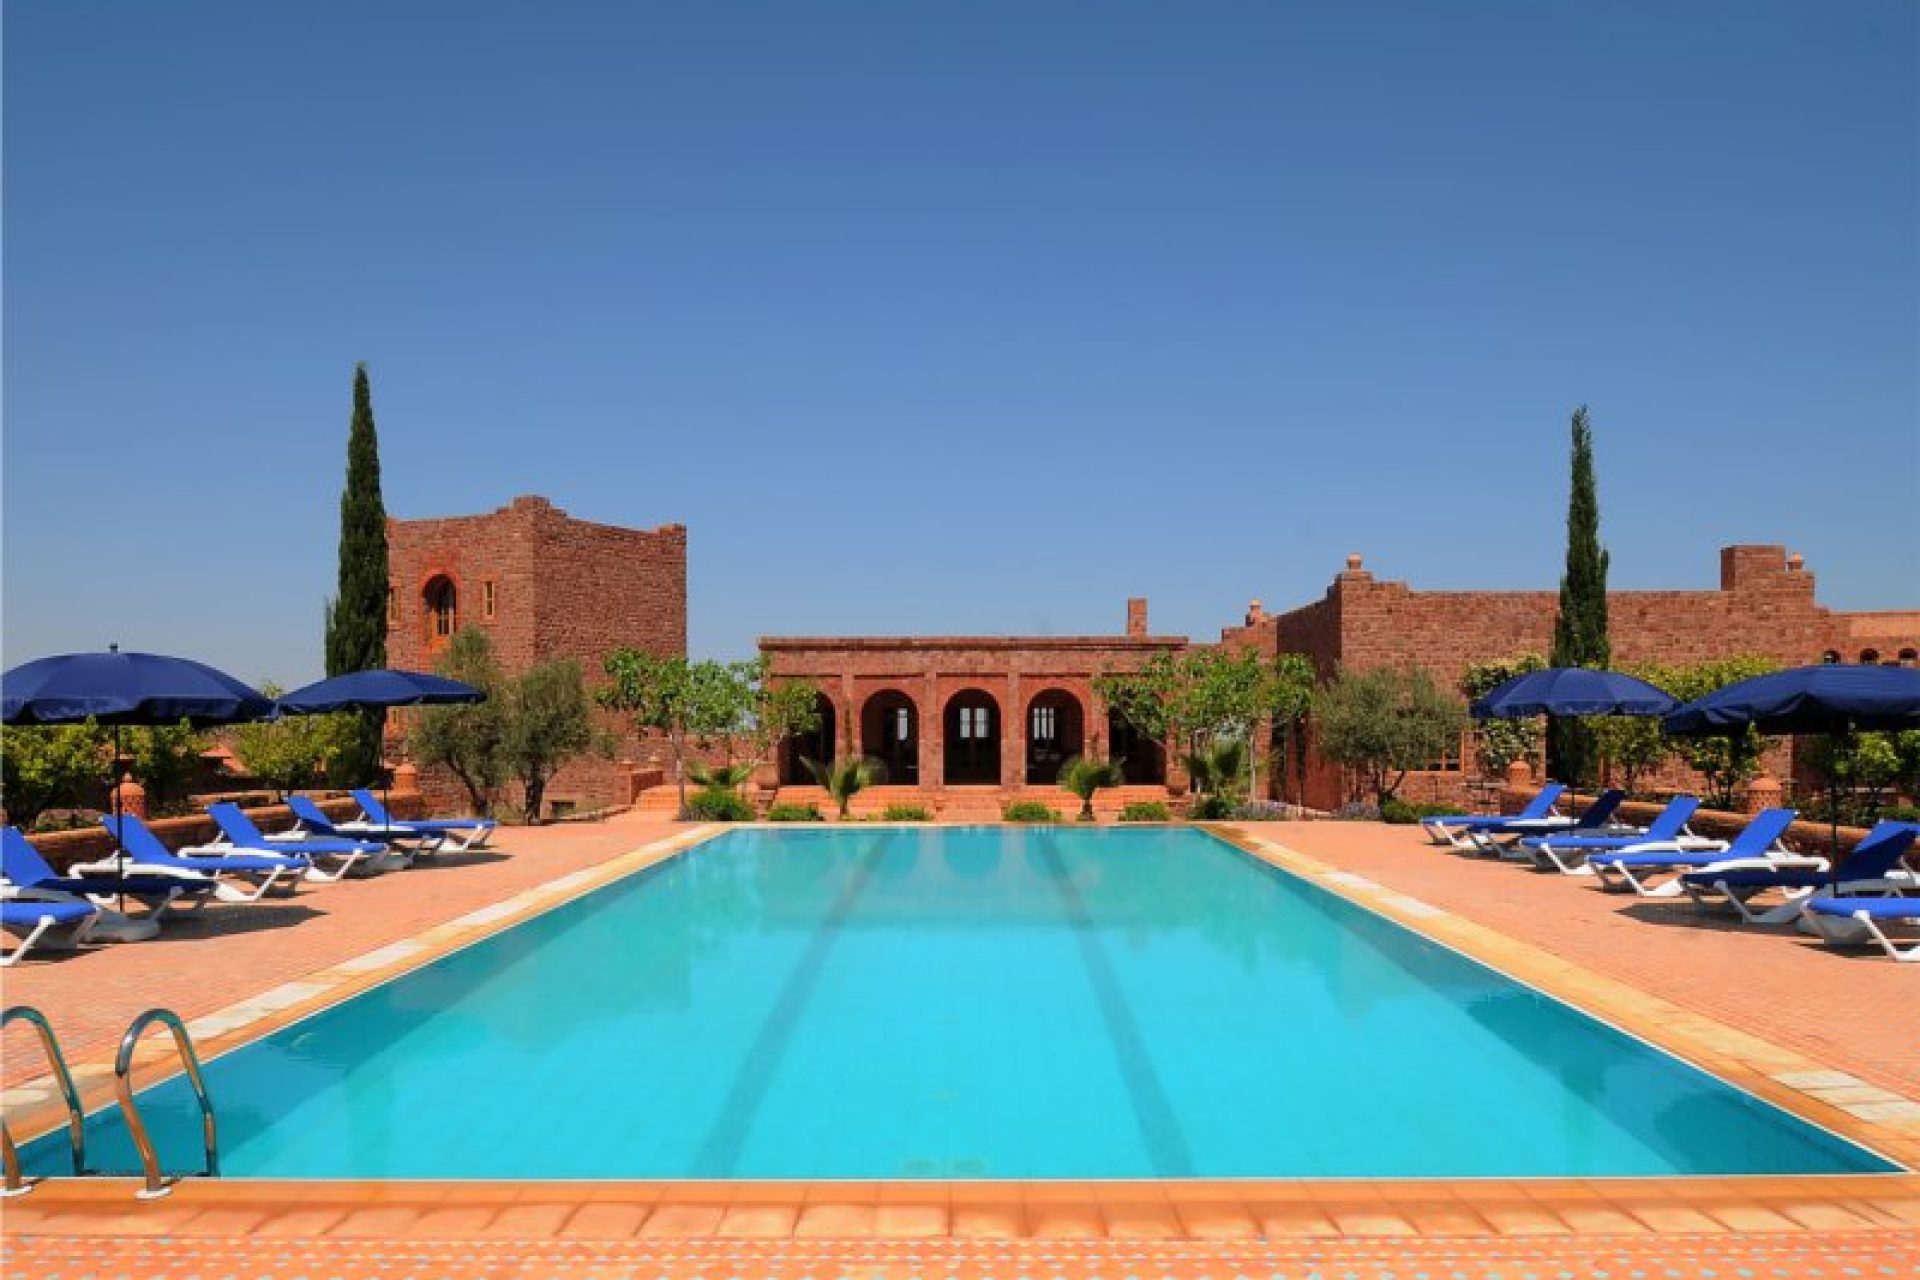 Kasbah Angour lovely large pool